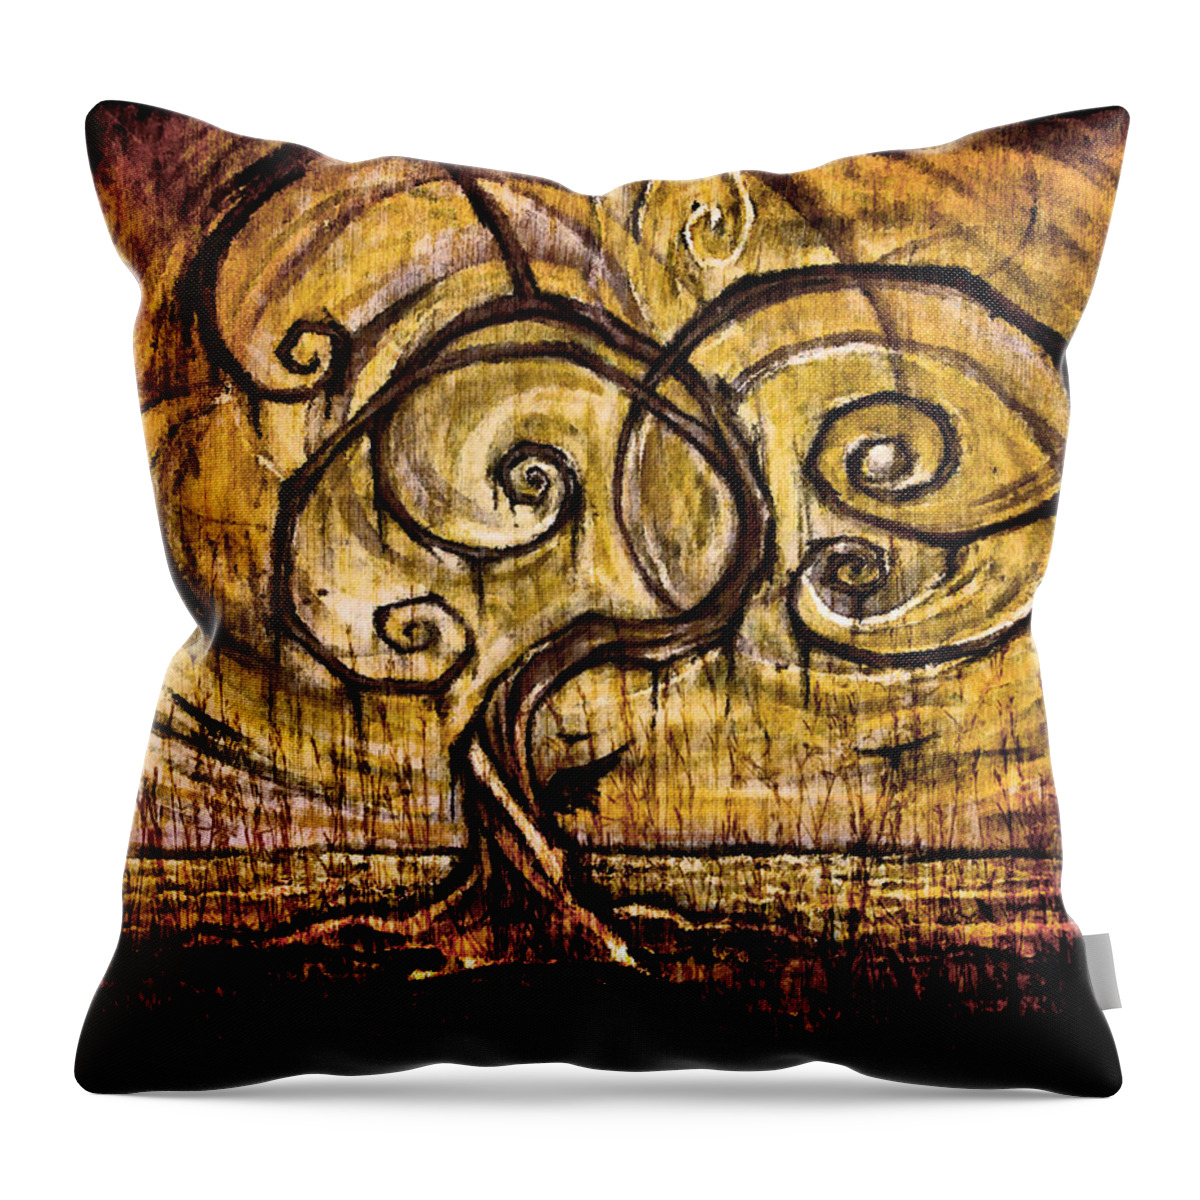 Tree Throw Pillow featuring the drawing Jfx2014-076 by Emilio Arostegui